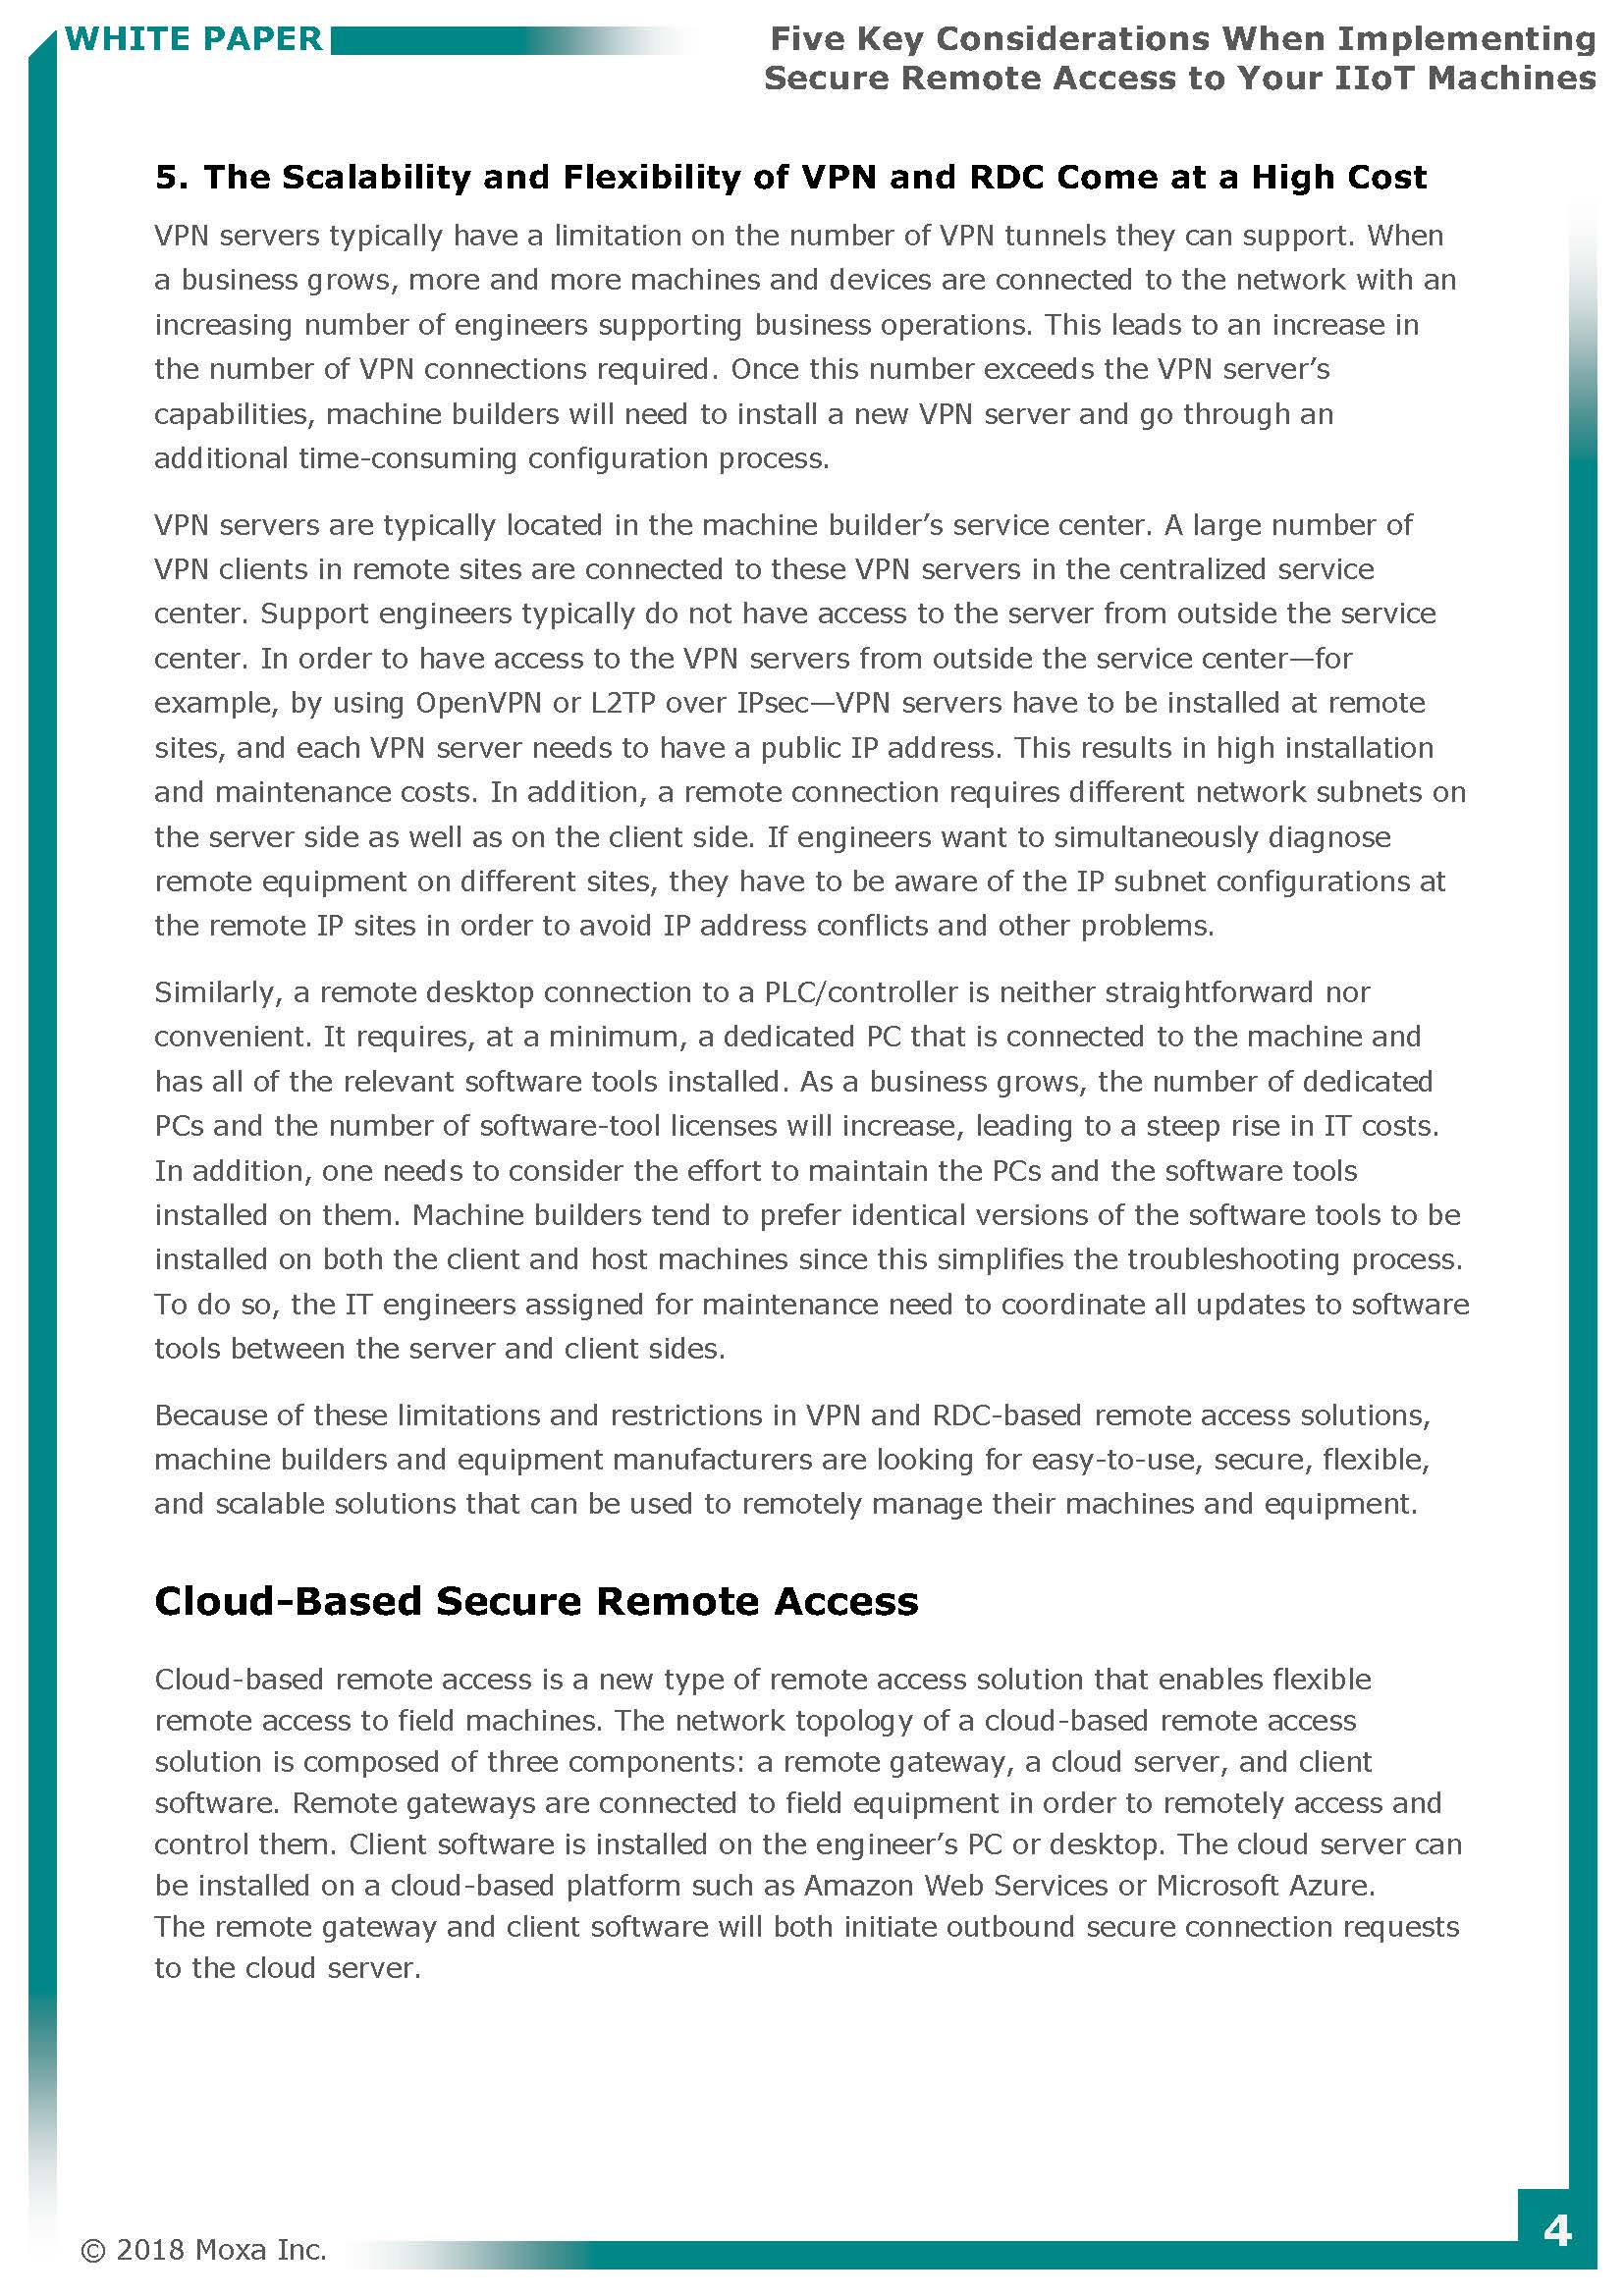 Moxa_Cloud_Based_Remote_Access_Solution_MRC_Page_5.jpg